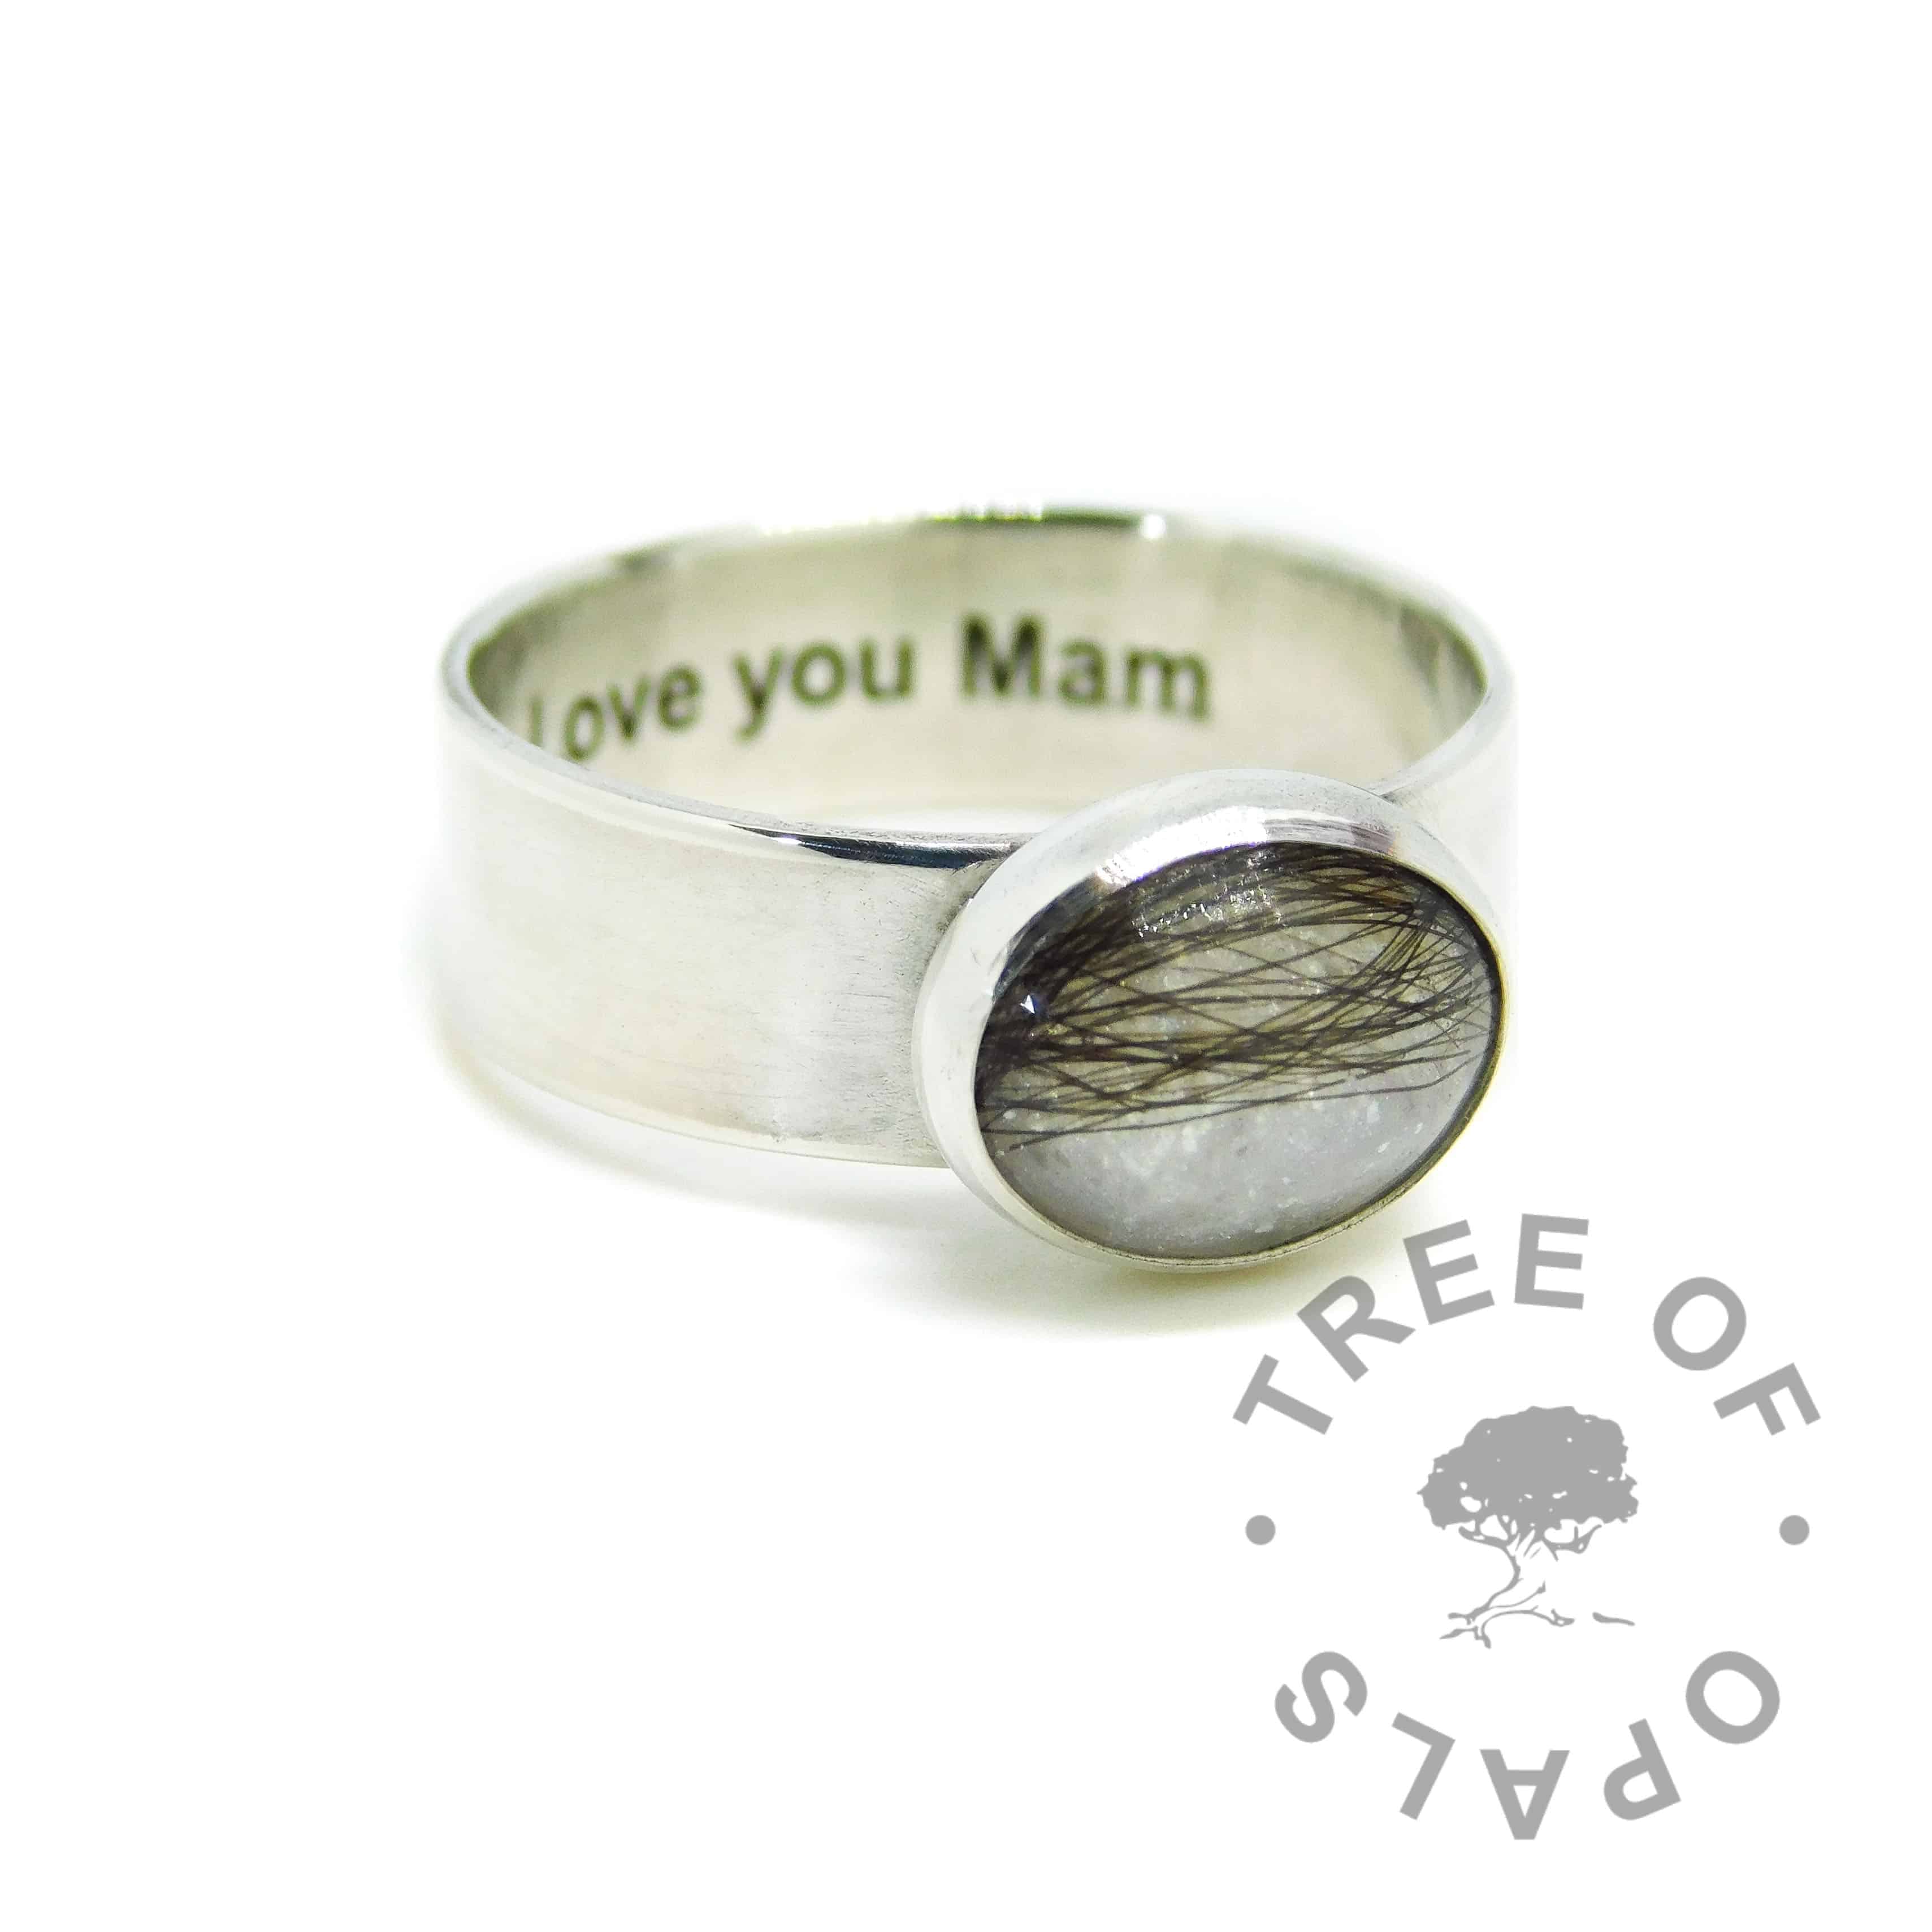 Engraved 6mm lock of hair ring with unicorn white sparkle mix and dark brown hair. Engraved inside in Arial font. Handmade solid sterling silver memorial ring